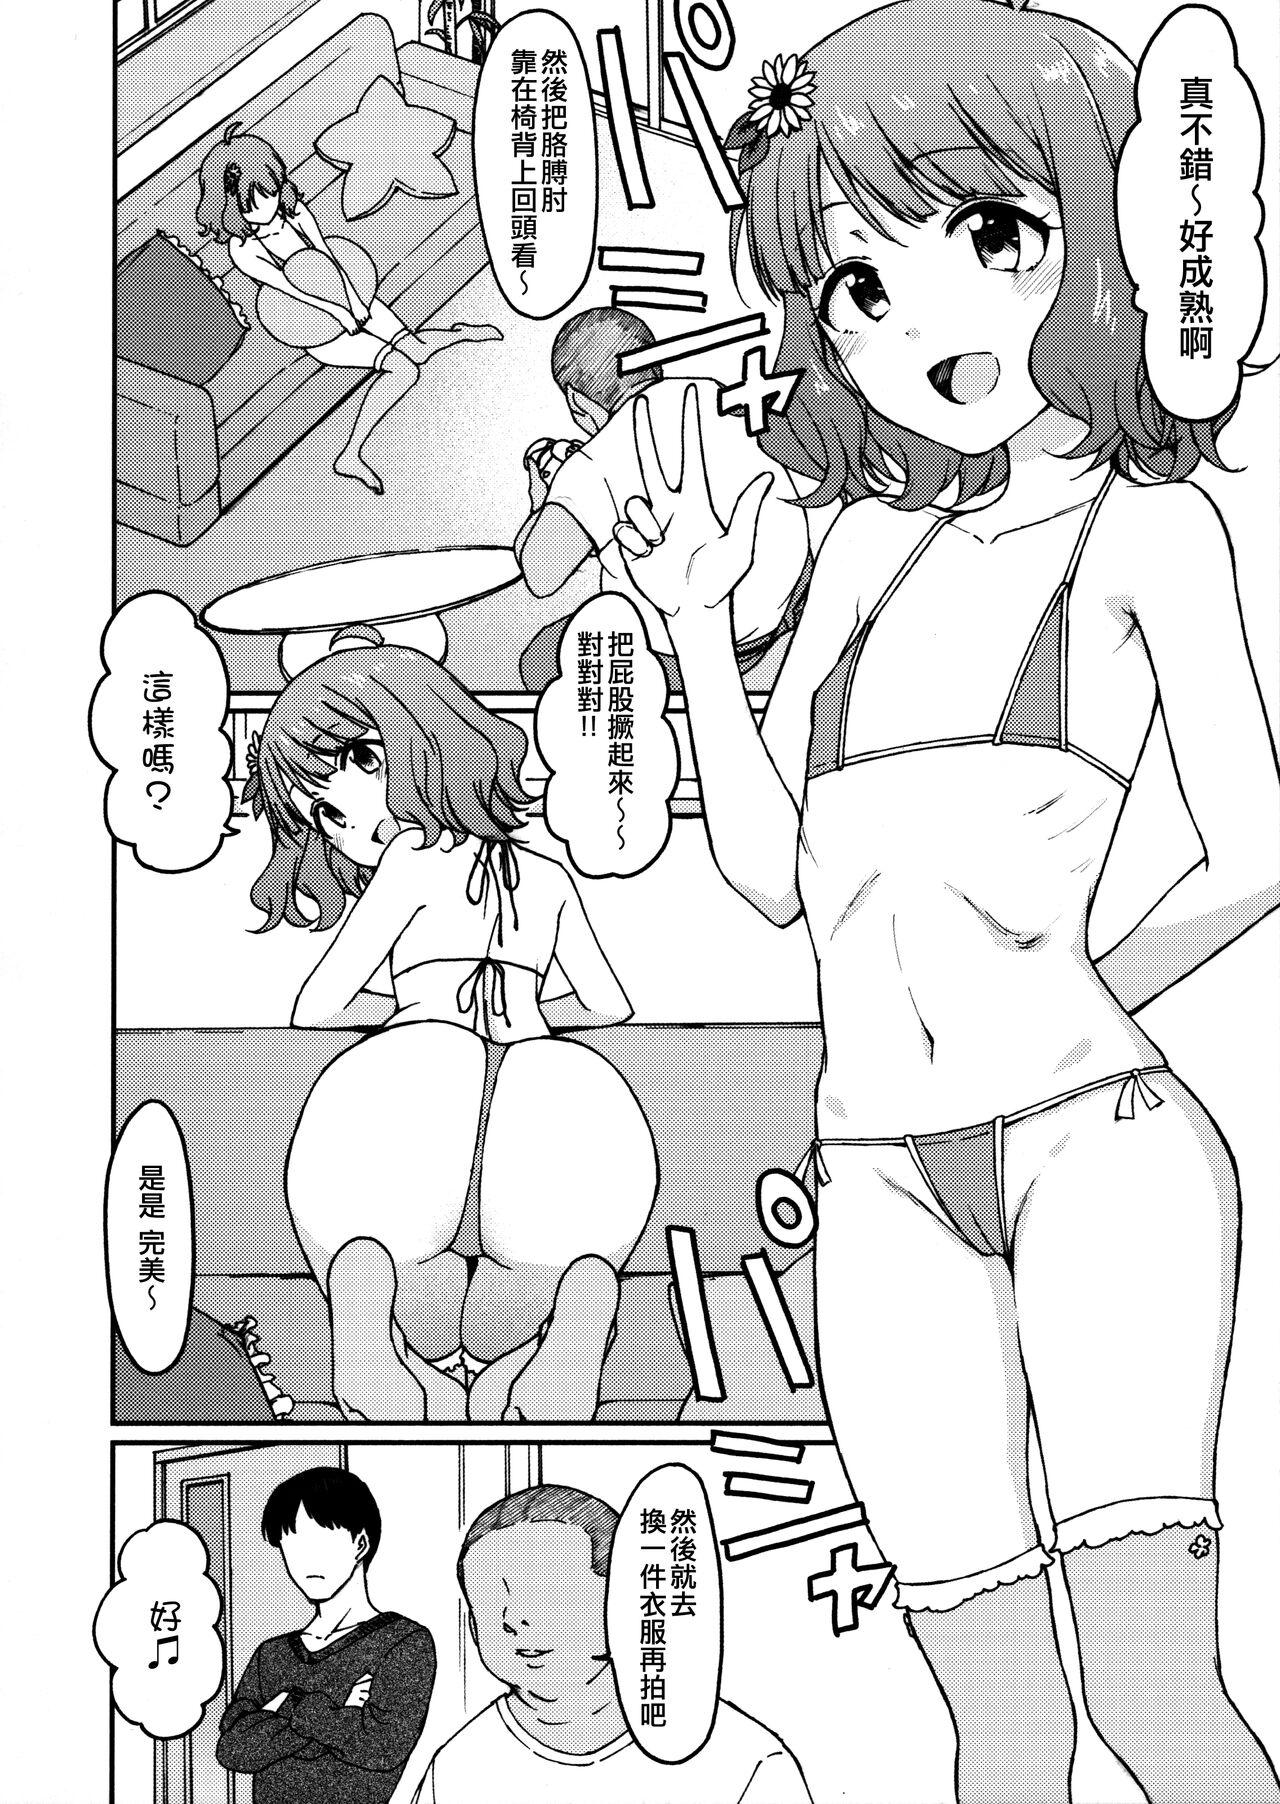 Fun Candy Wrapper - The idolmaster Panty - Page 5